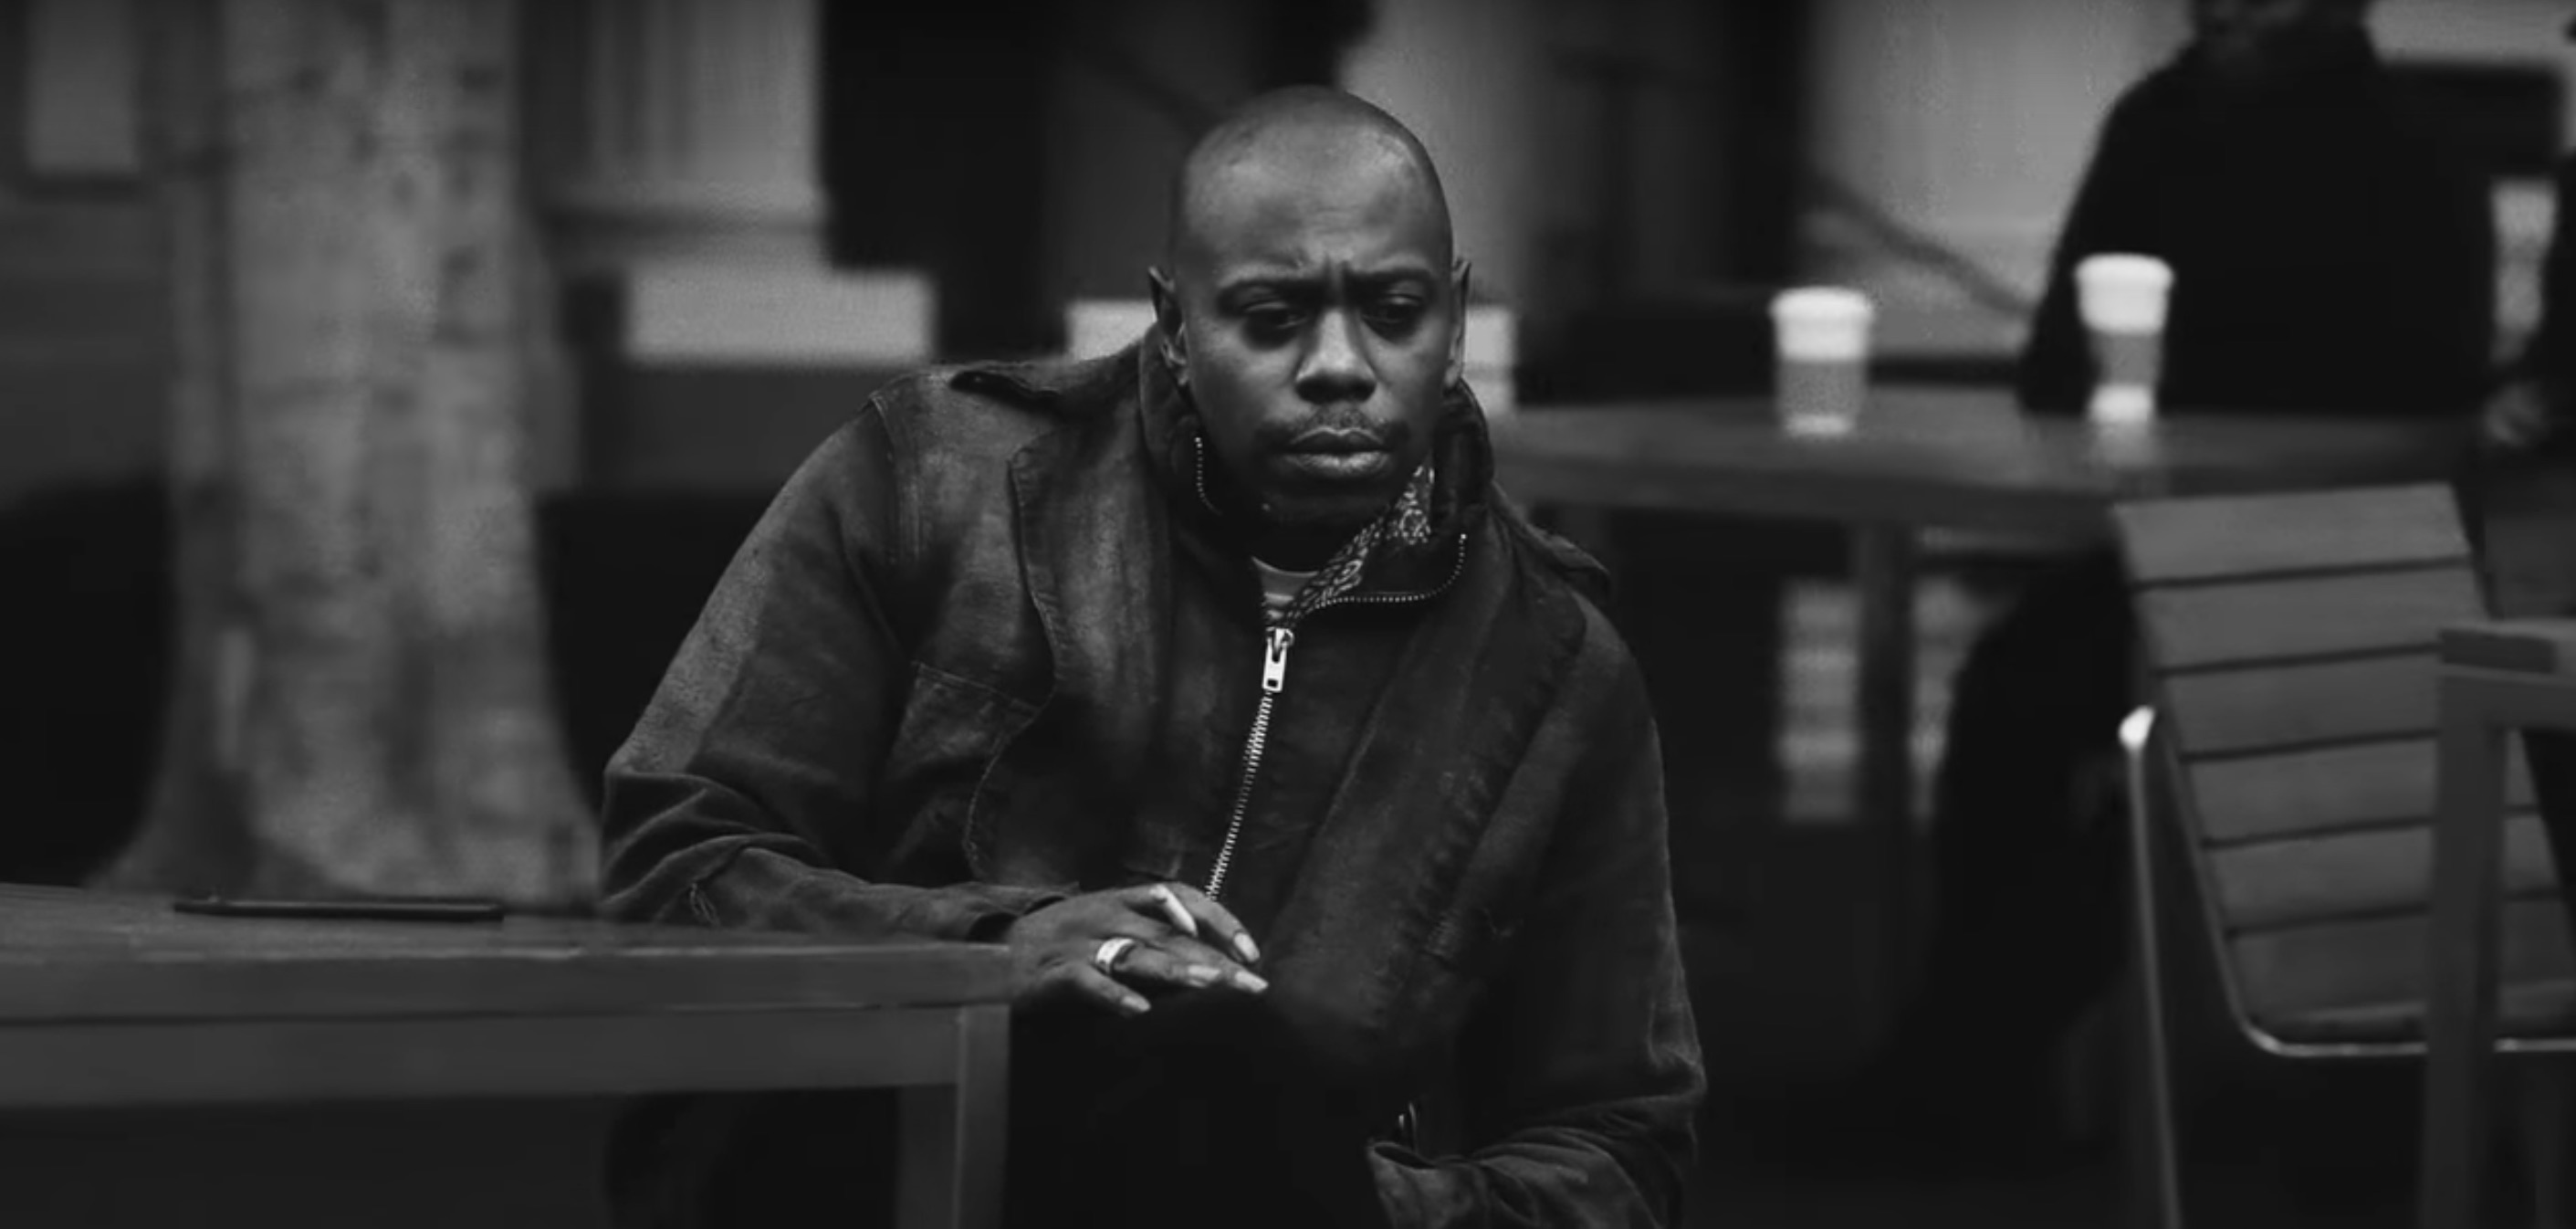 Netflix to start airing Dave Chappelle specials on March 21st